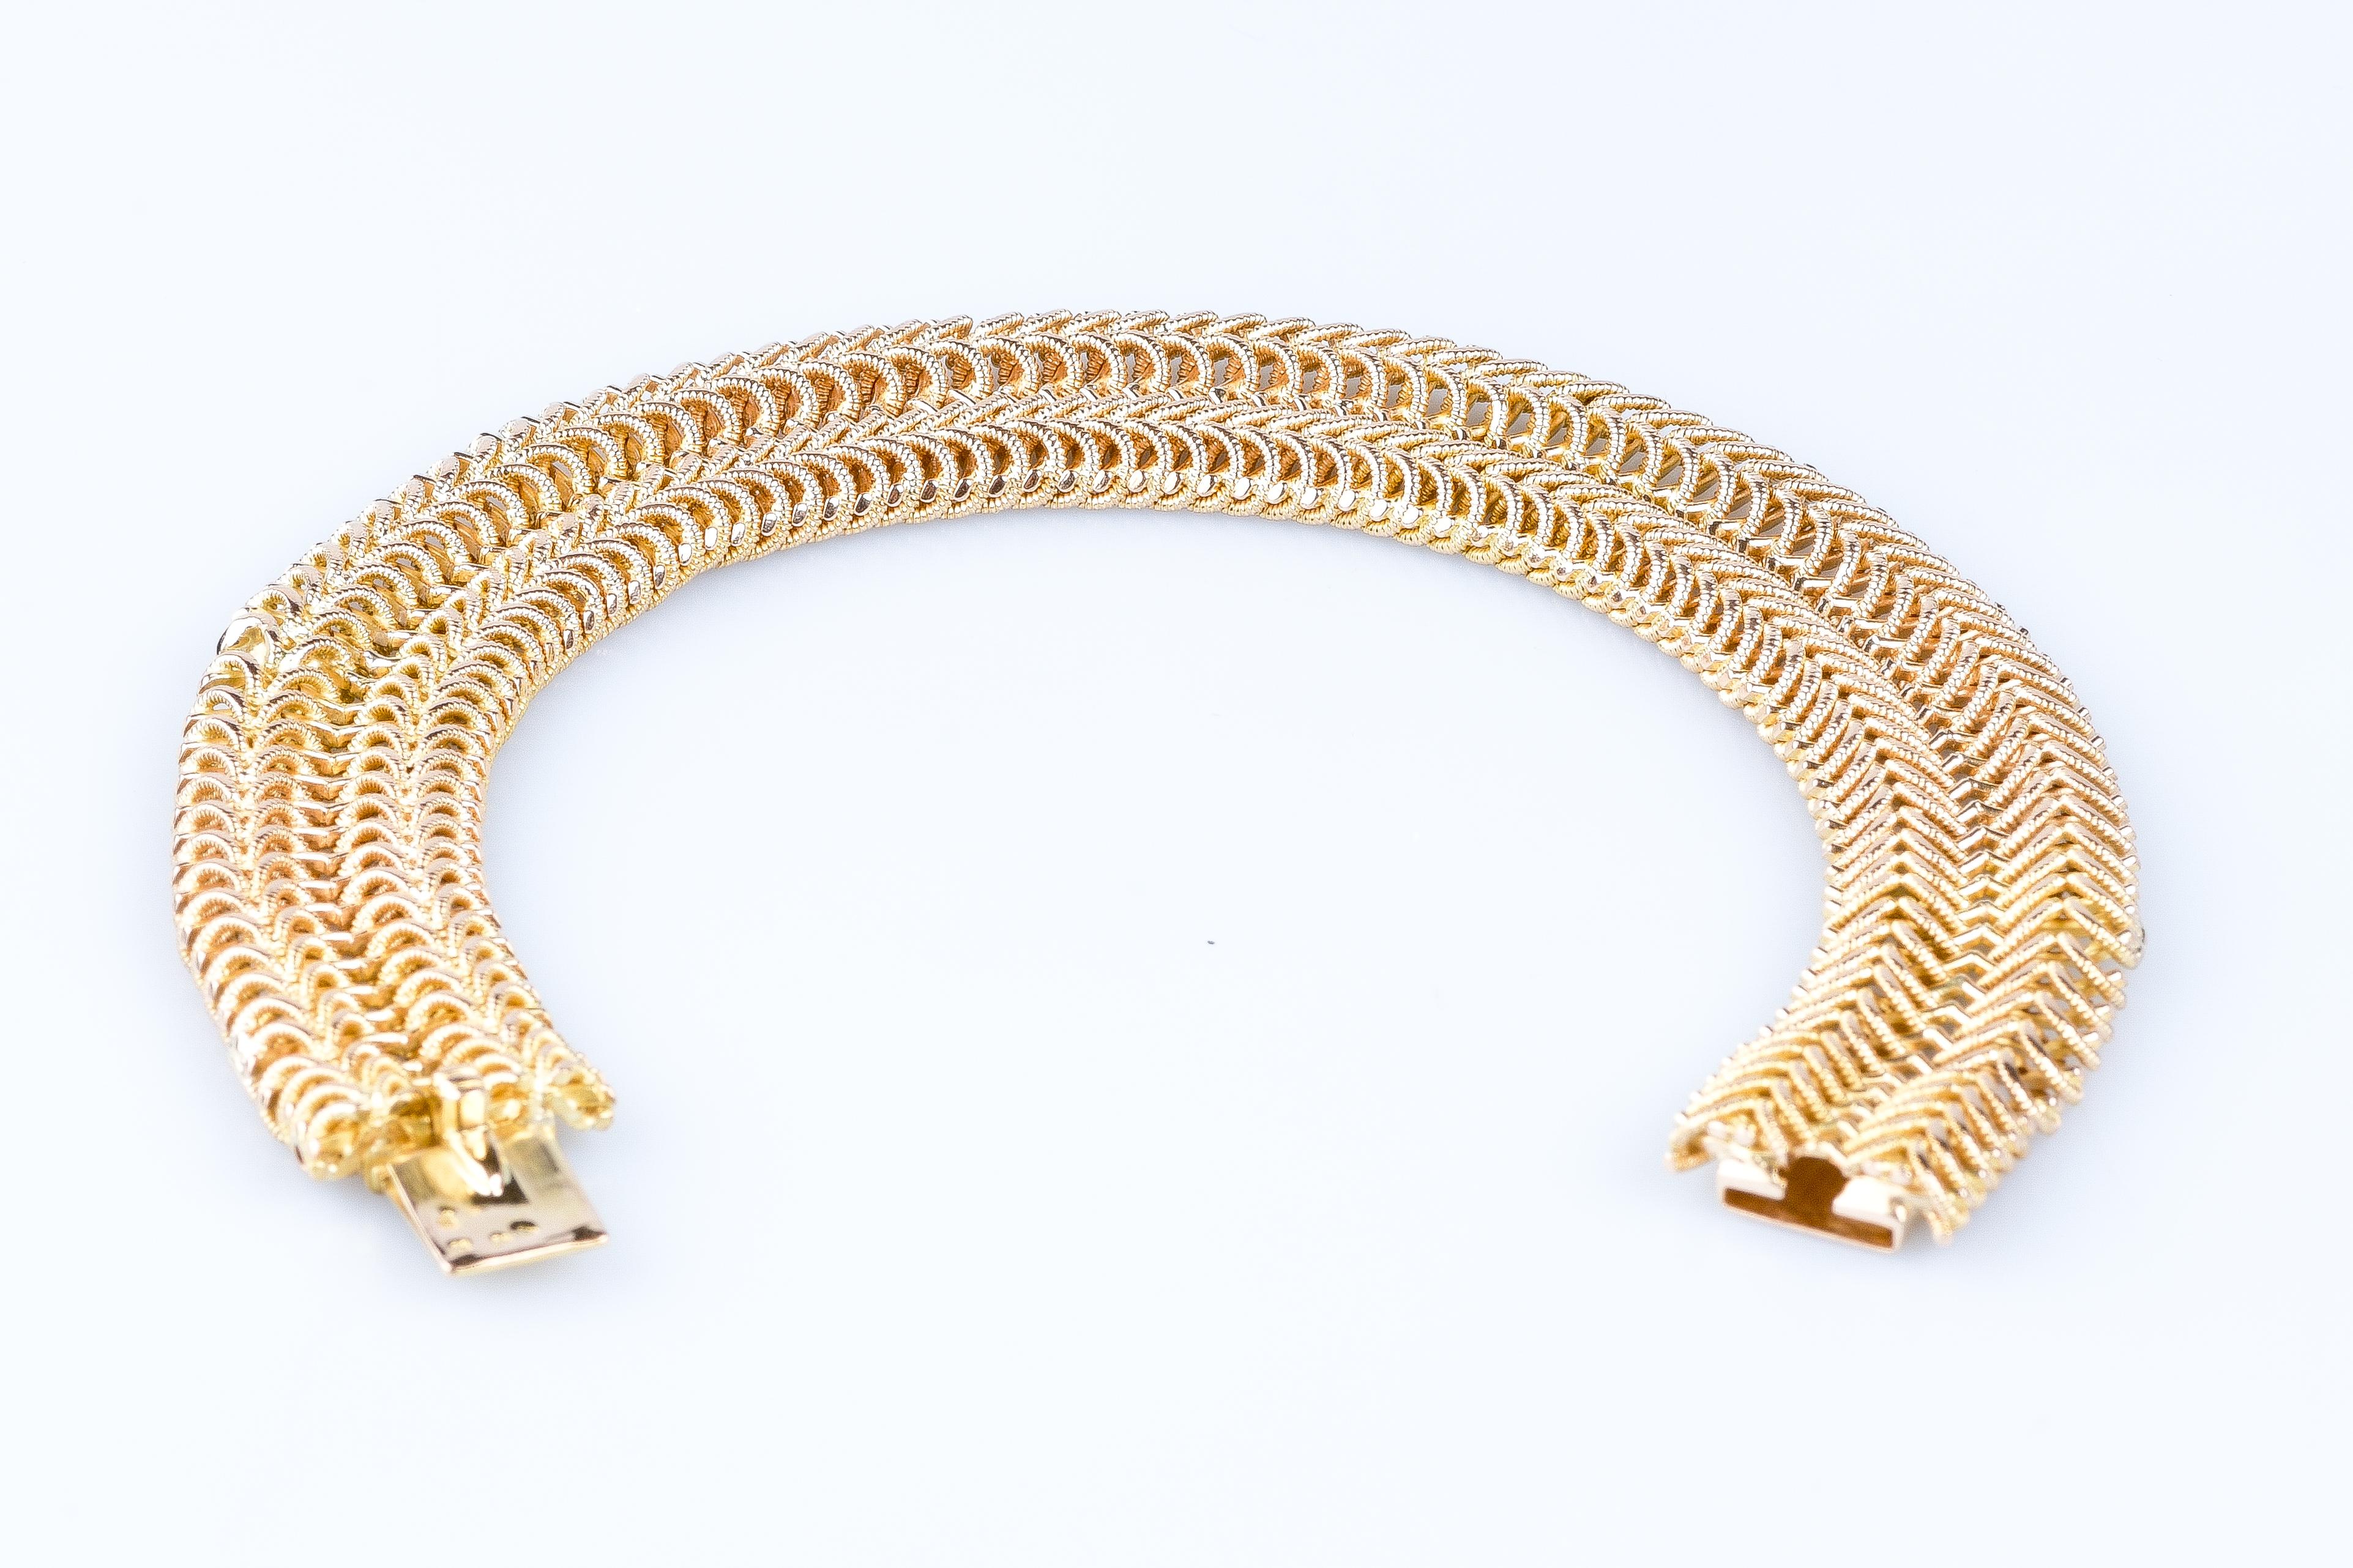 18 carat yellow gold bracelet designed with a soft mesh.

 Weight : 45.80 gr. 

Dimensions : 19.5 x 1.40 cm

Jewel delivered in a luxurious box. 

Condition : Like new

18 carat gold eagle head hallmark on the jewel. 

Secure and express delivery